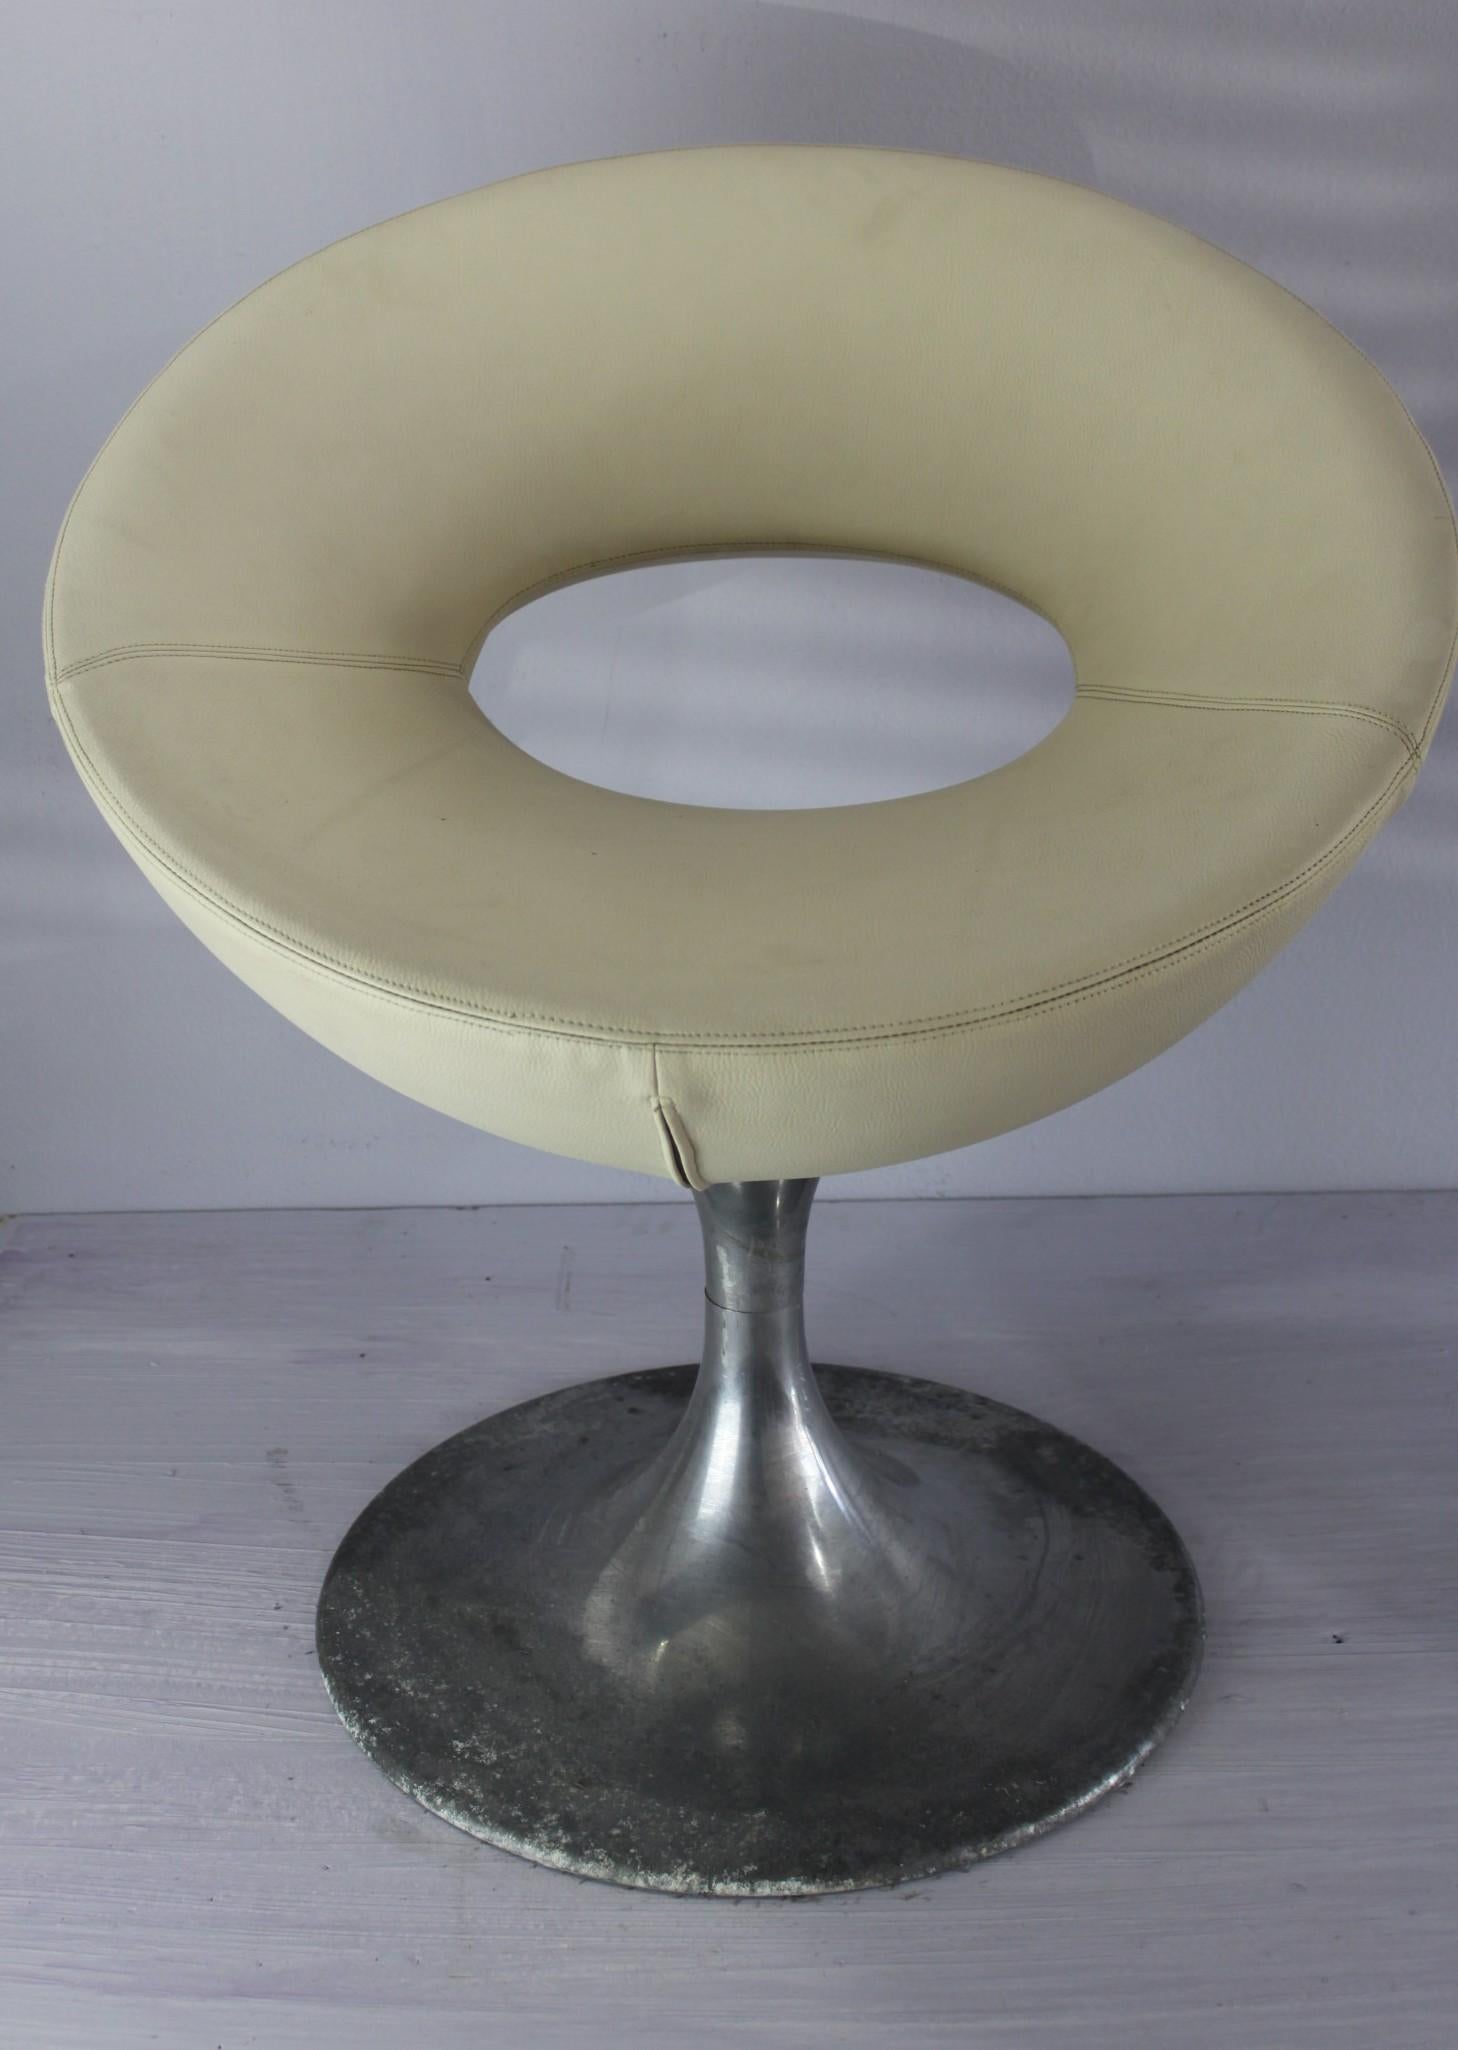 Discover a hidden gem in the world of furniture - exquisite vintage Italian chairs crafted from posh cast aluminum, boasting a space age design that will transport you to another era. These chairs are in impeccable condition, with a patina eco